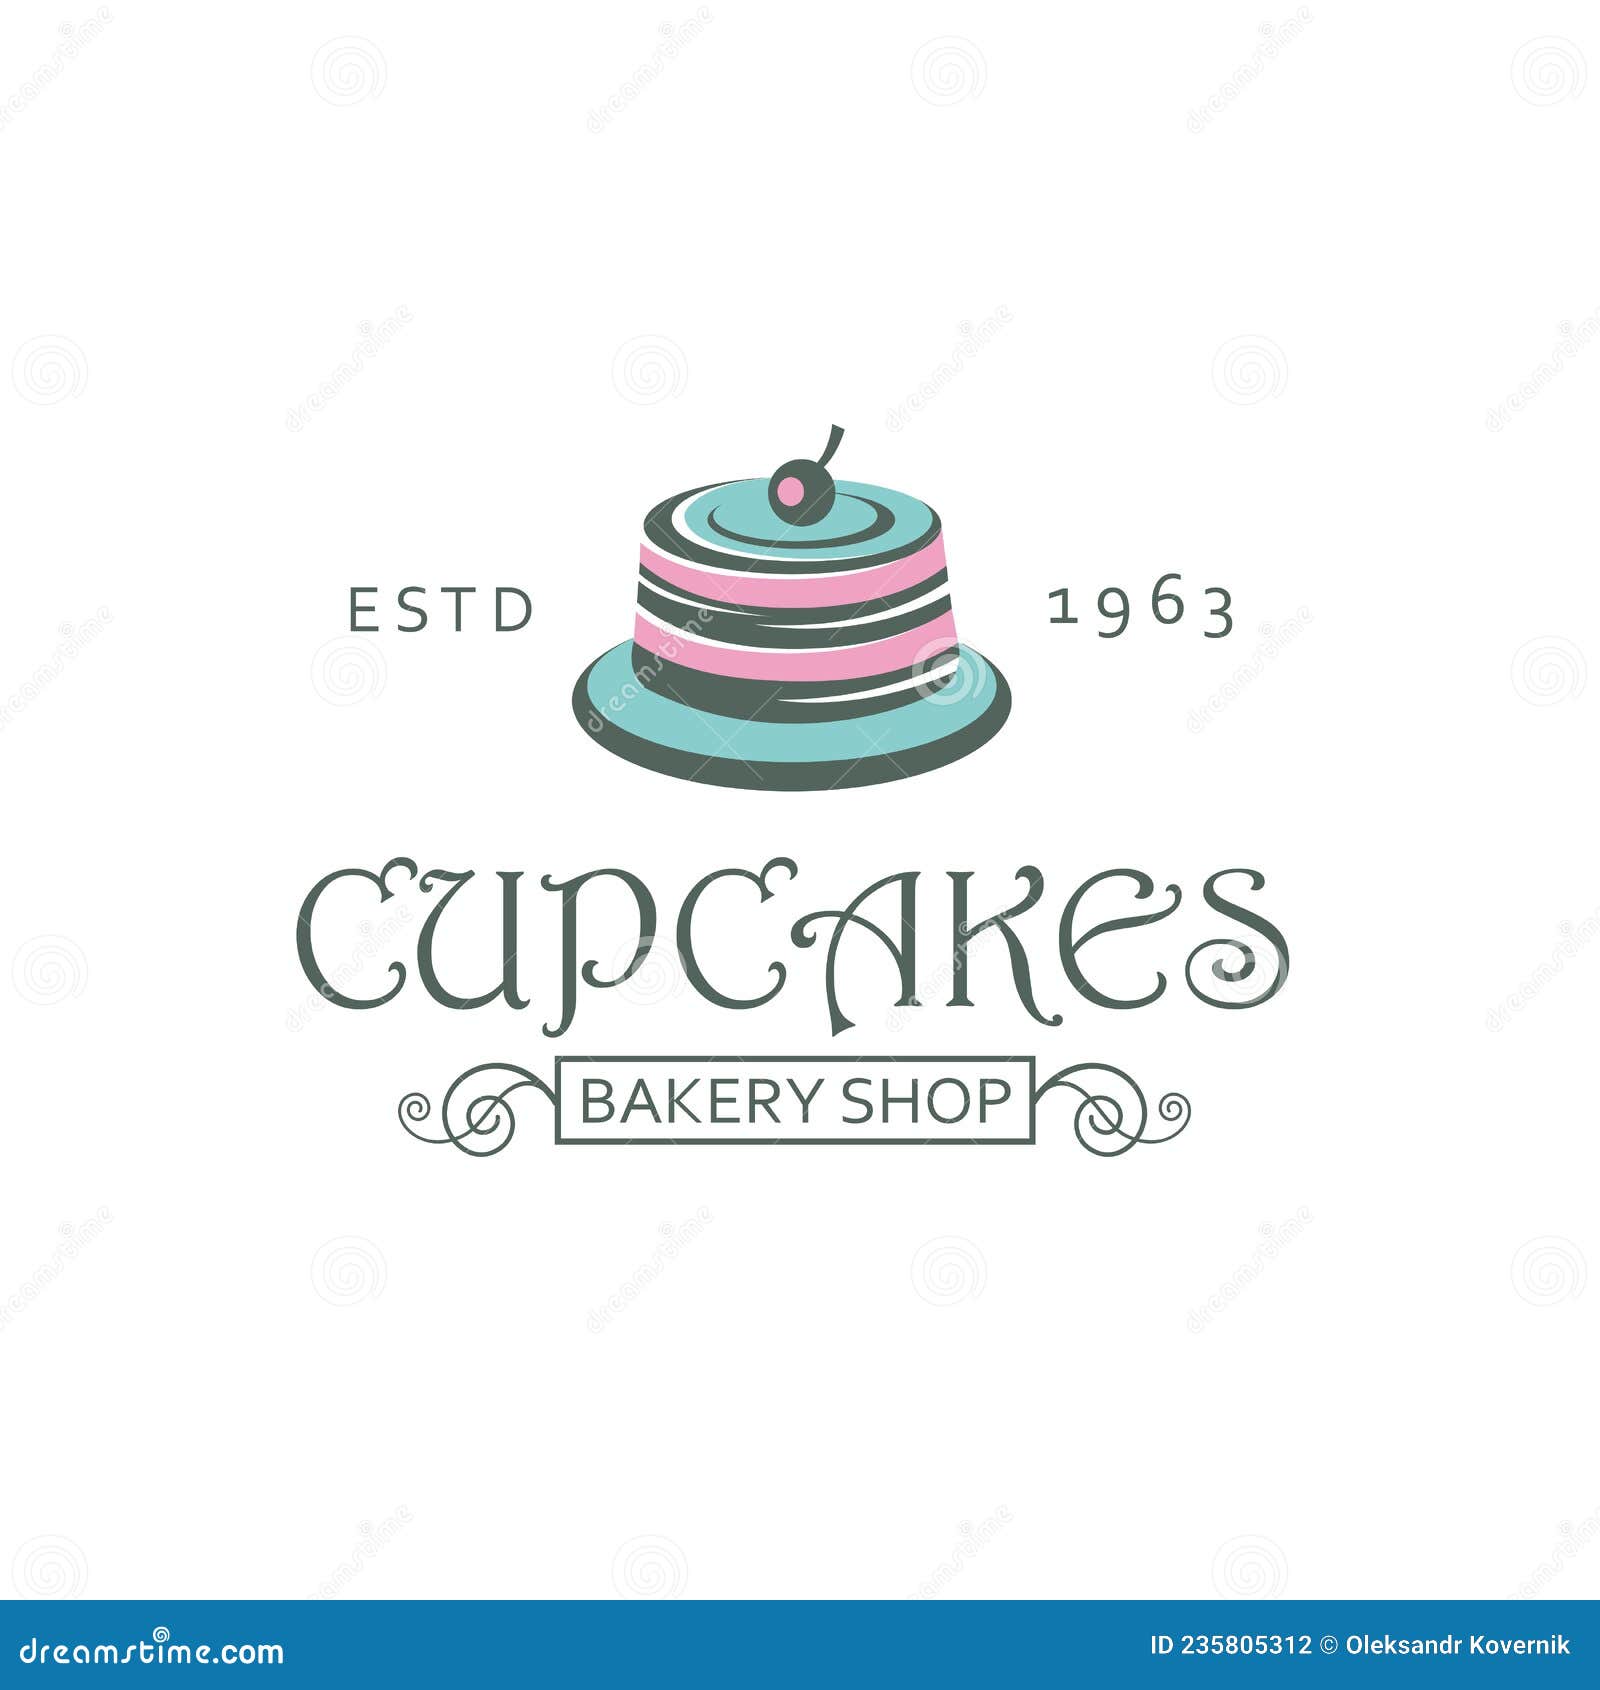 Label with cupcake stock vector. Illustration of cupcake - 235805312